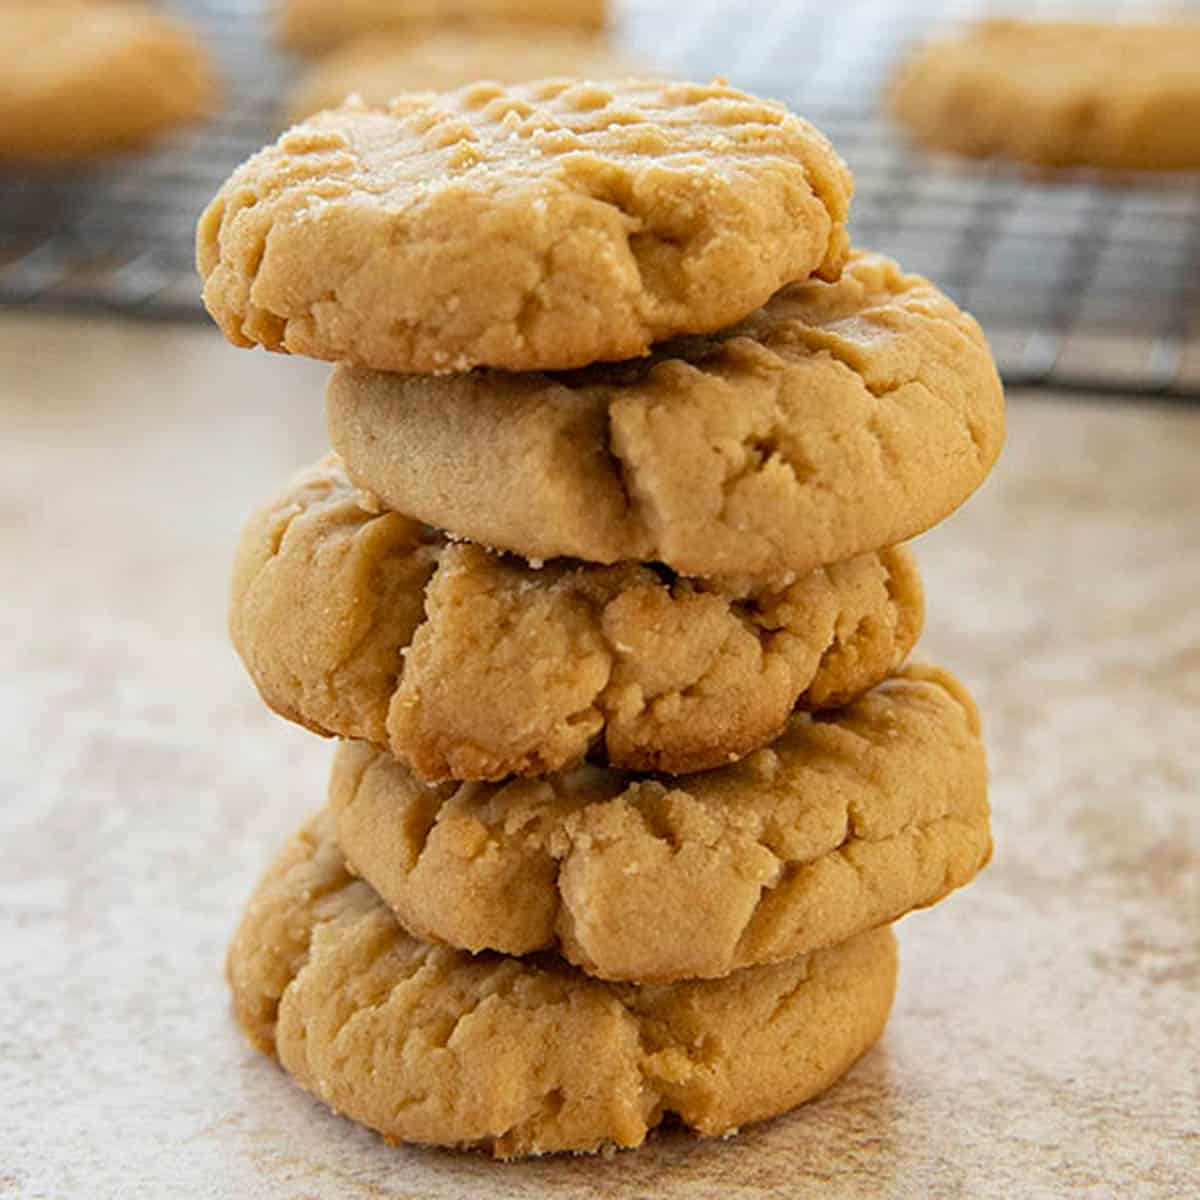 Peanut Butter Cookies - The Salty Marshmallow